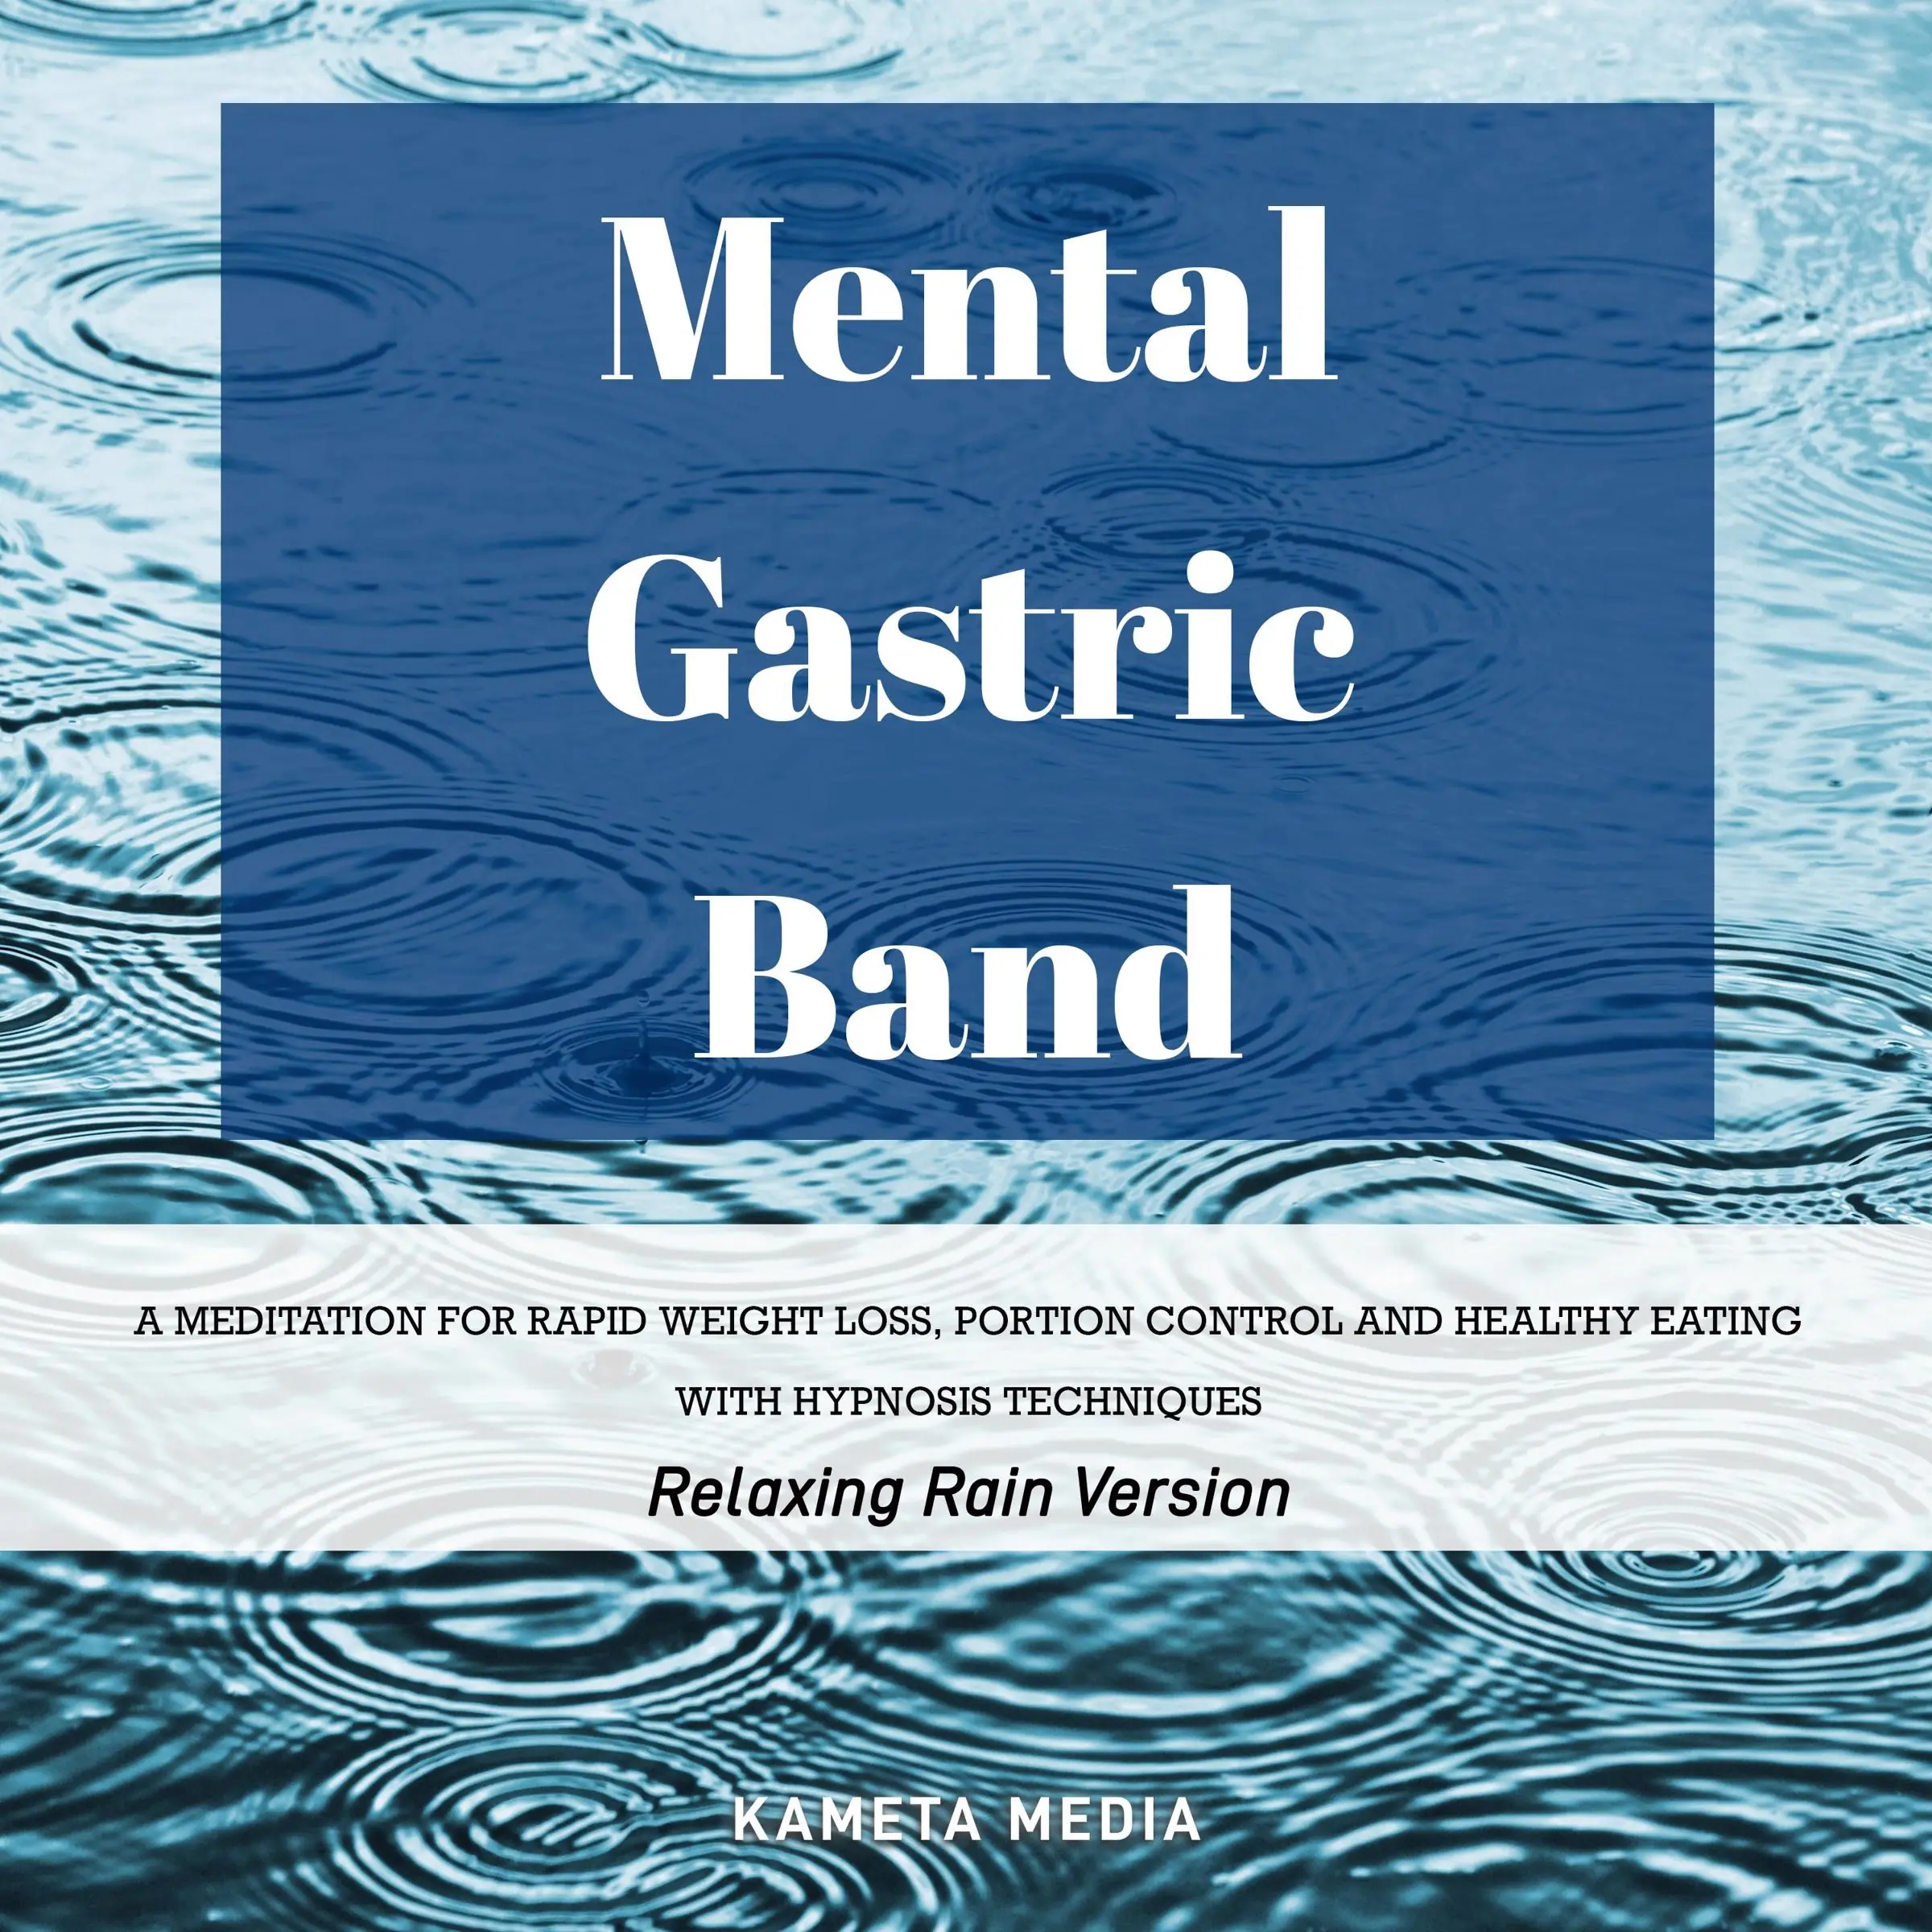 Mental Gastric Band: A Meditation for Rapid Weight Loss, Portion Control and Healthy Eating with Hypnosis Techniques (Relaxing Rain Version) Audiobook by Kameta Media